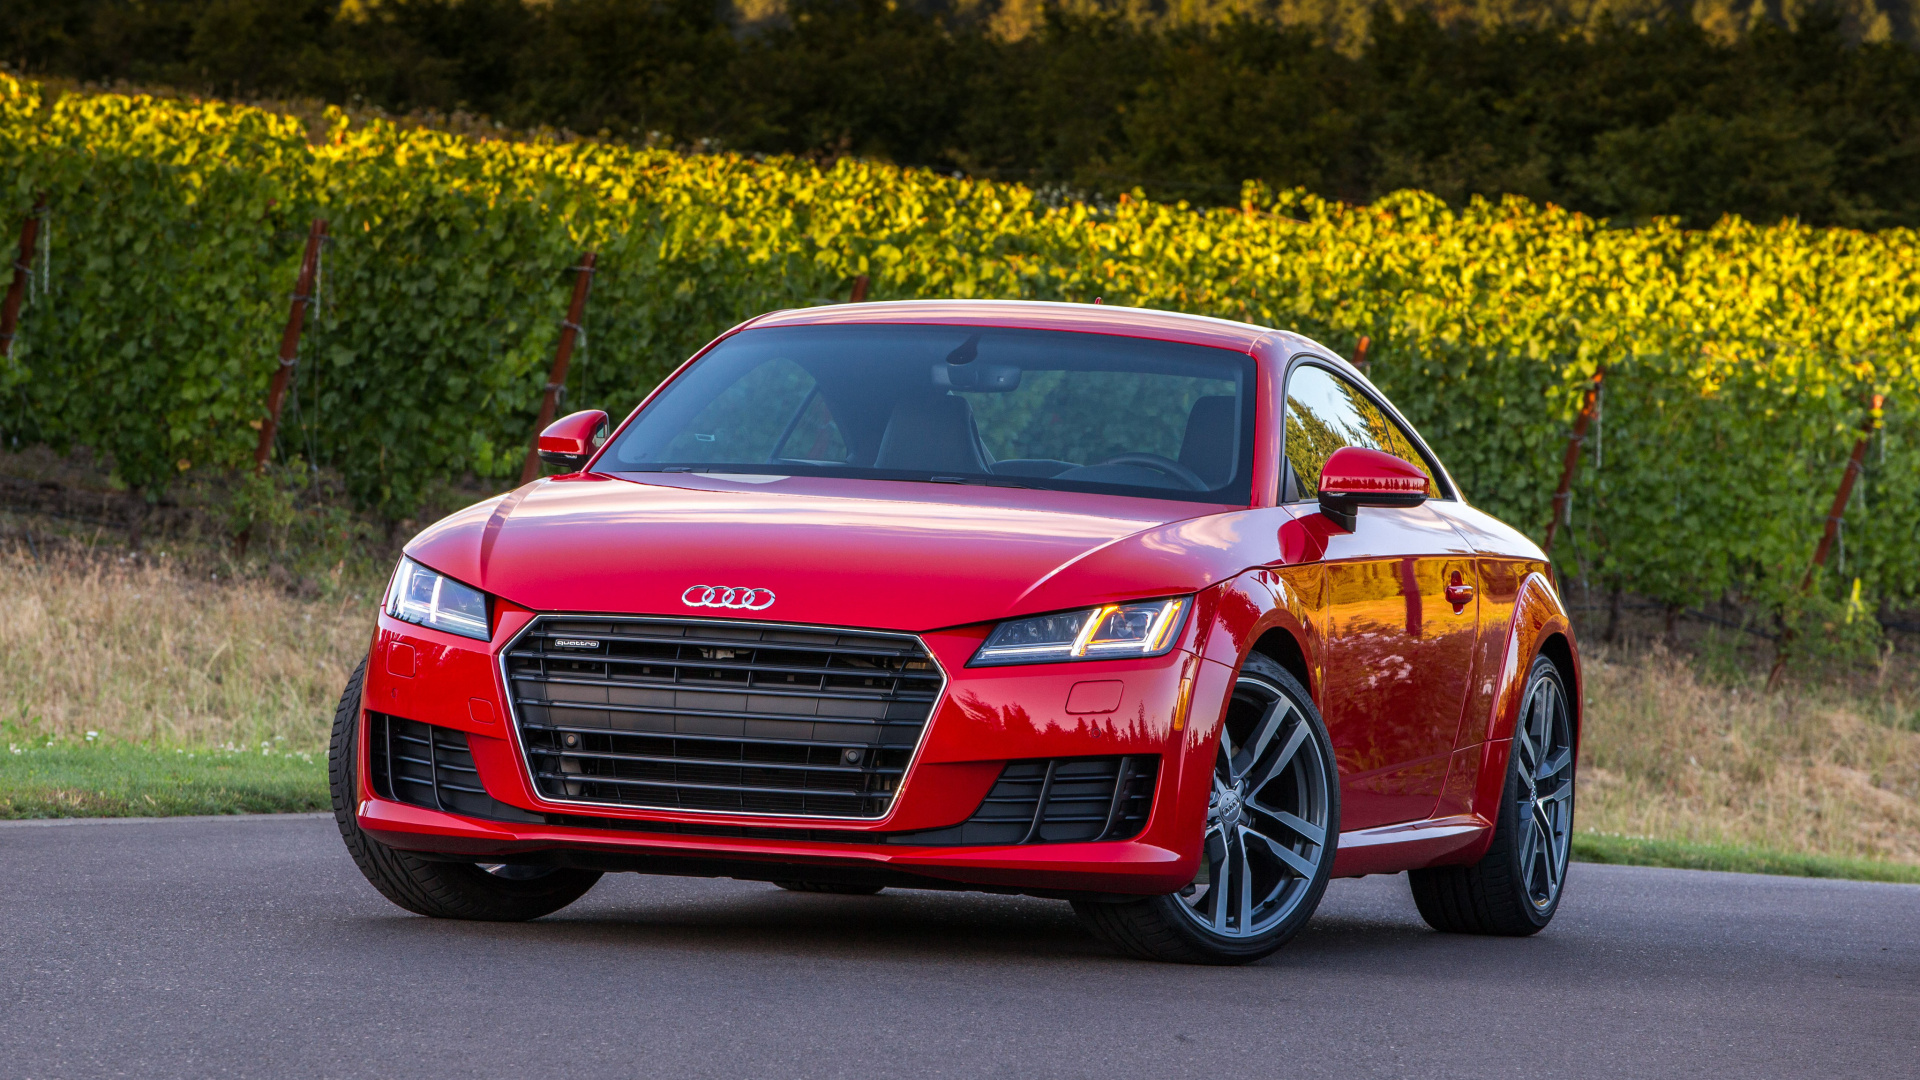 Red Audi Coupe on Road During Daytime. Wallpaper in 1920x1080 Resolution